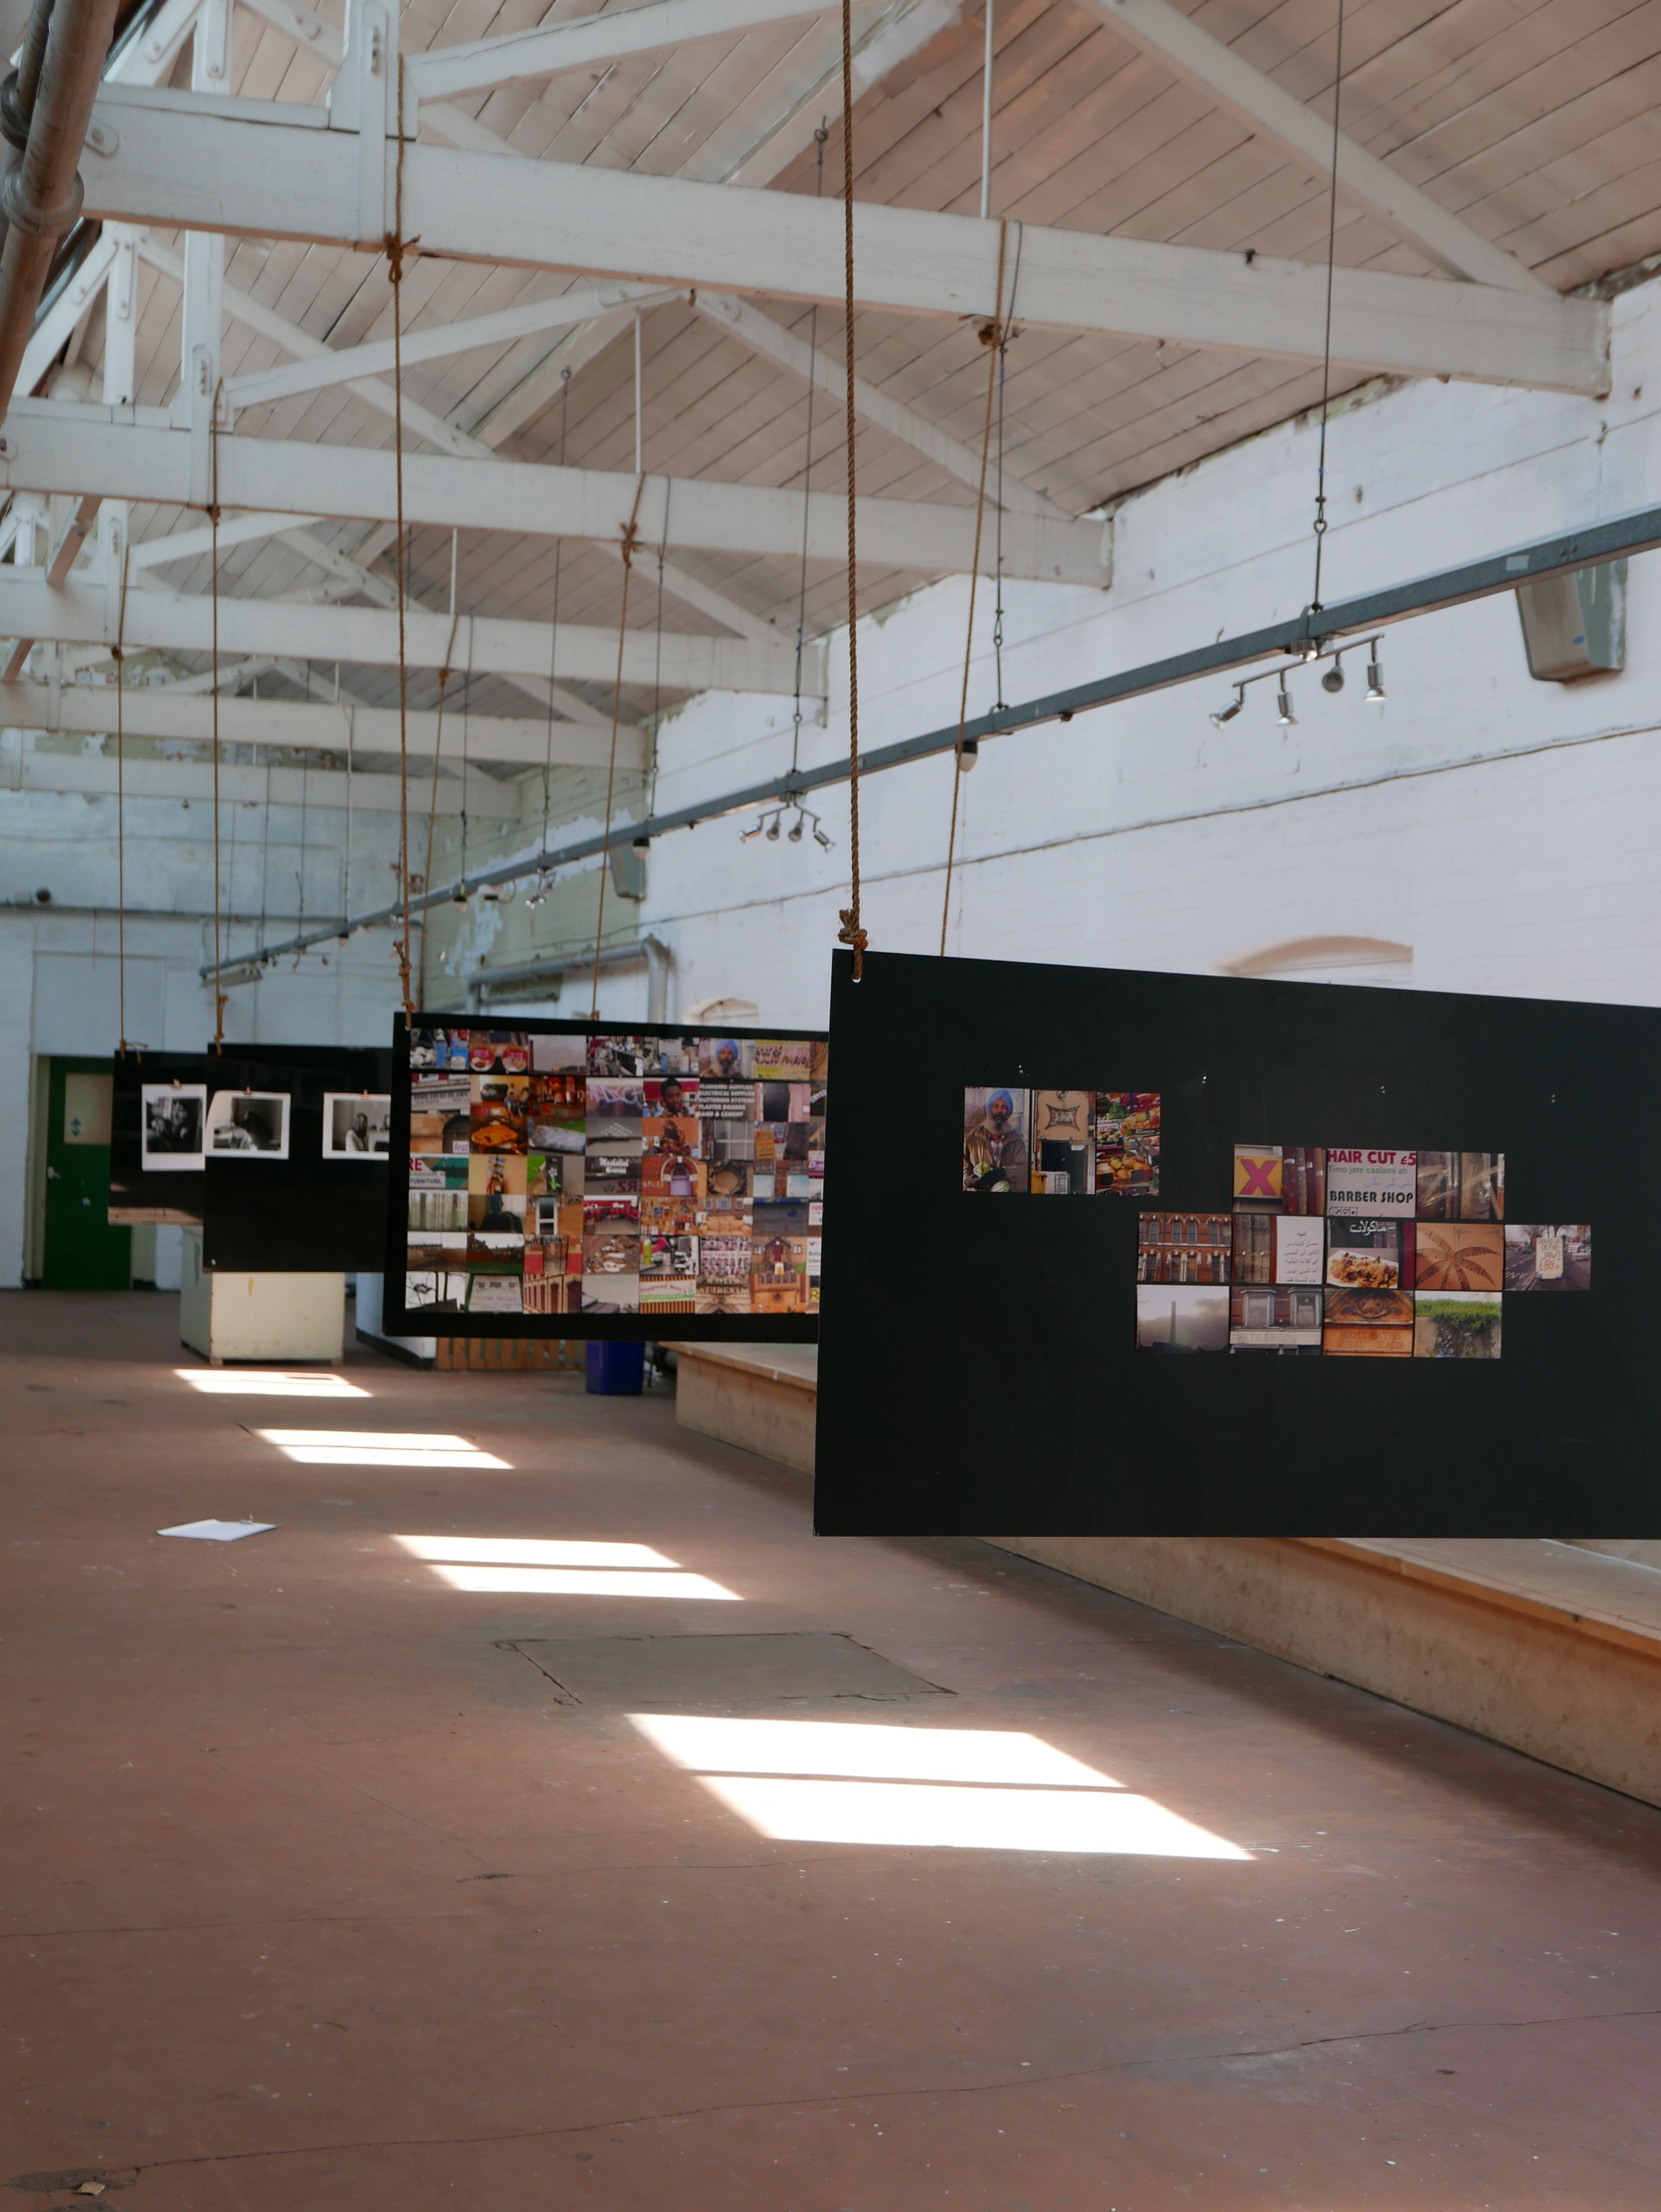 The Upper Gallery being used for a photography exhibition